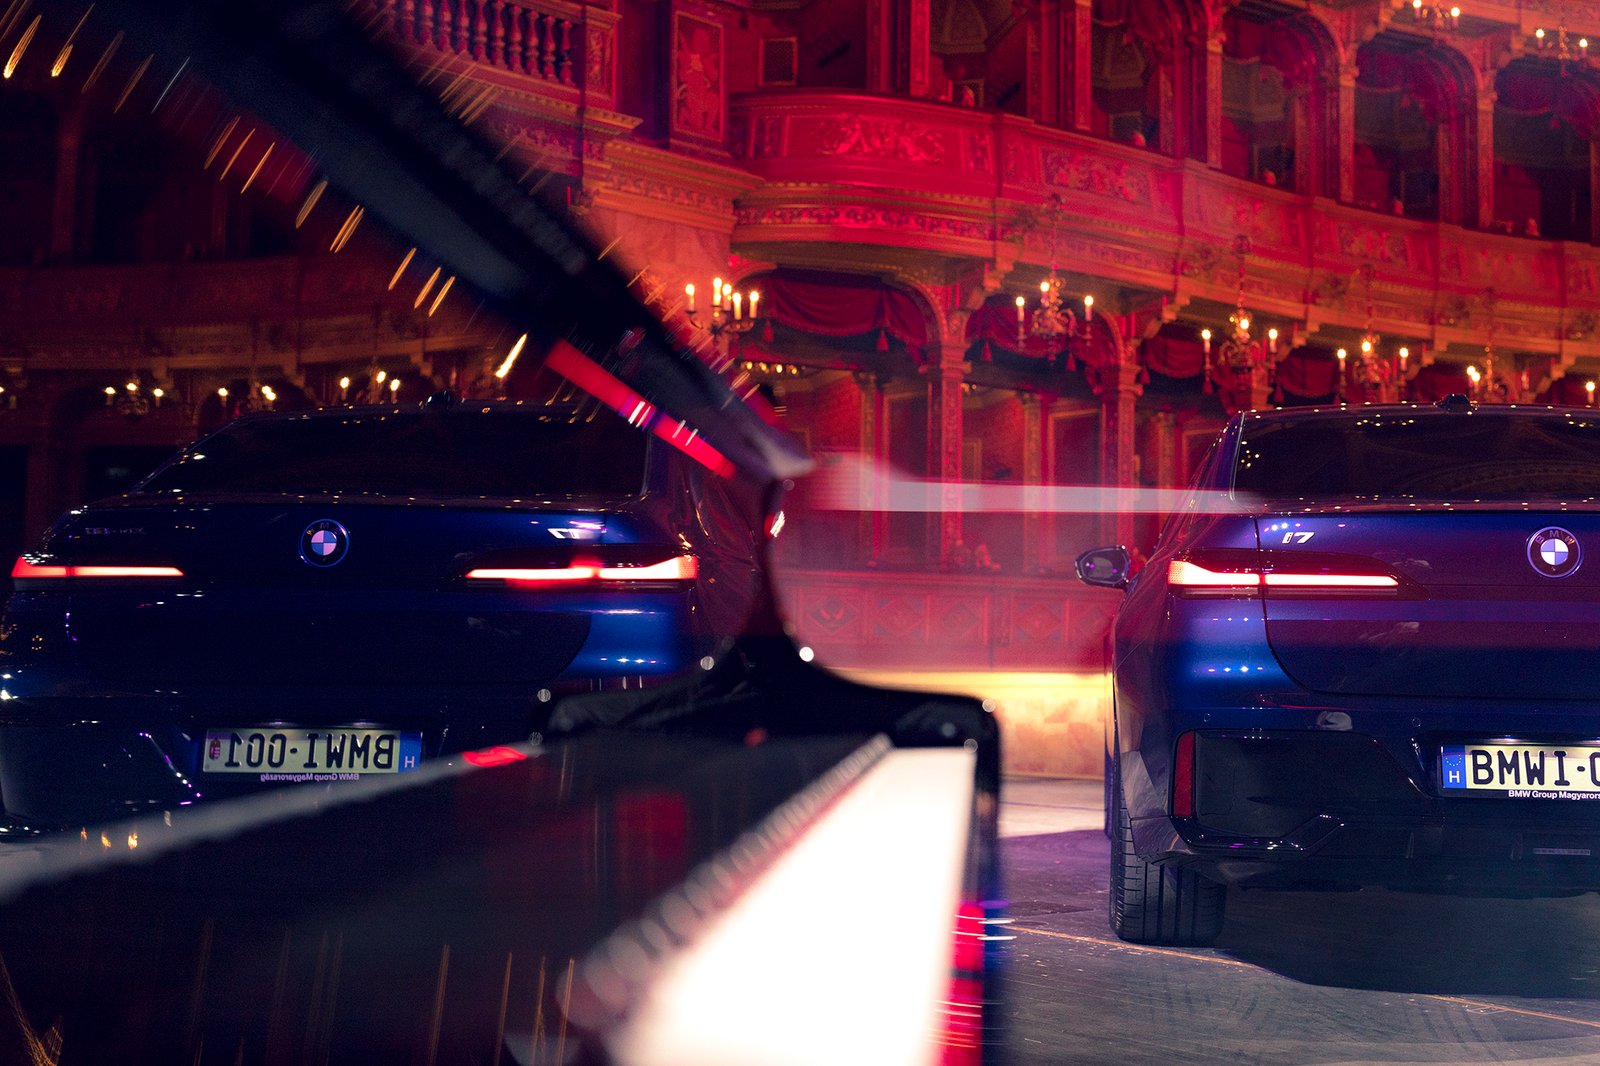 BMW i7 in the spotlight, exclusive photo session at the Opera House in Budapest.